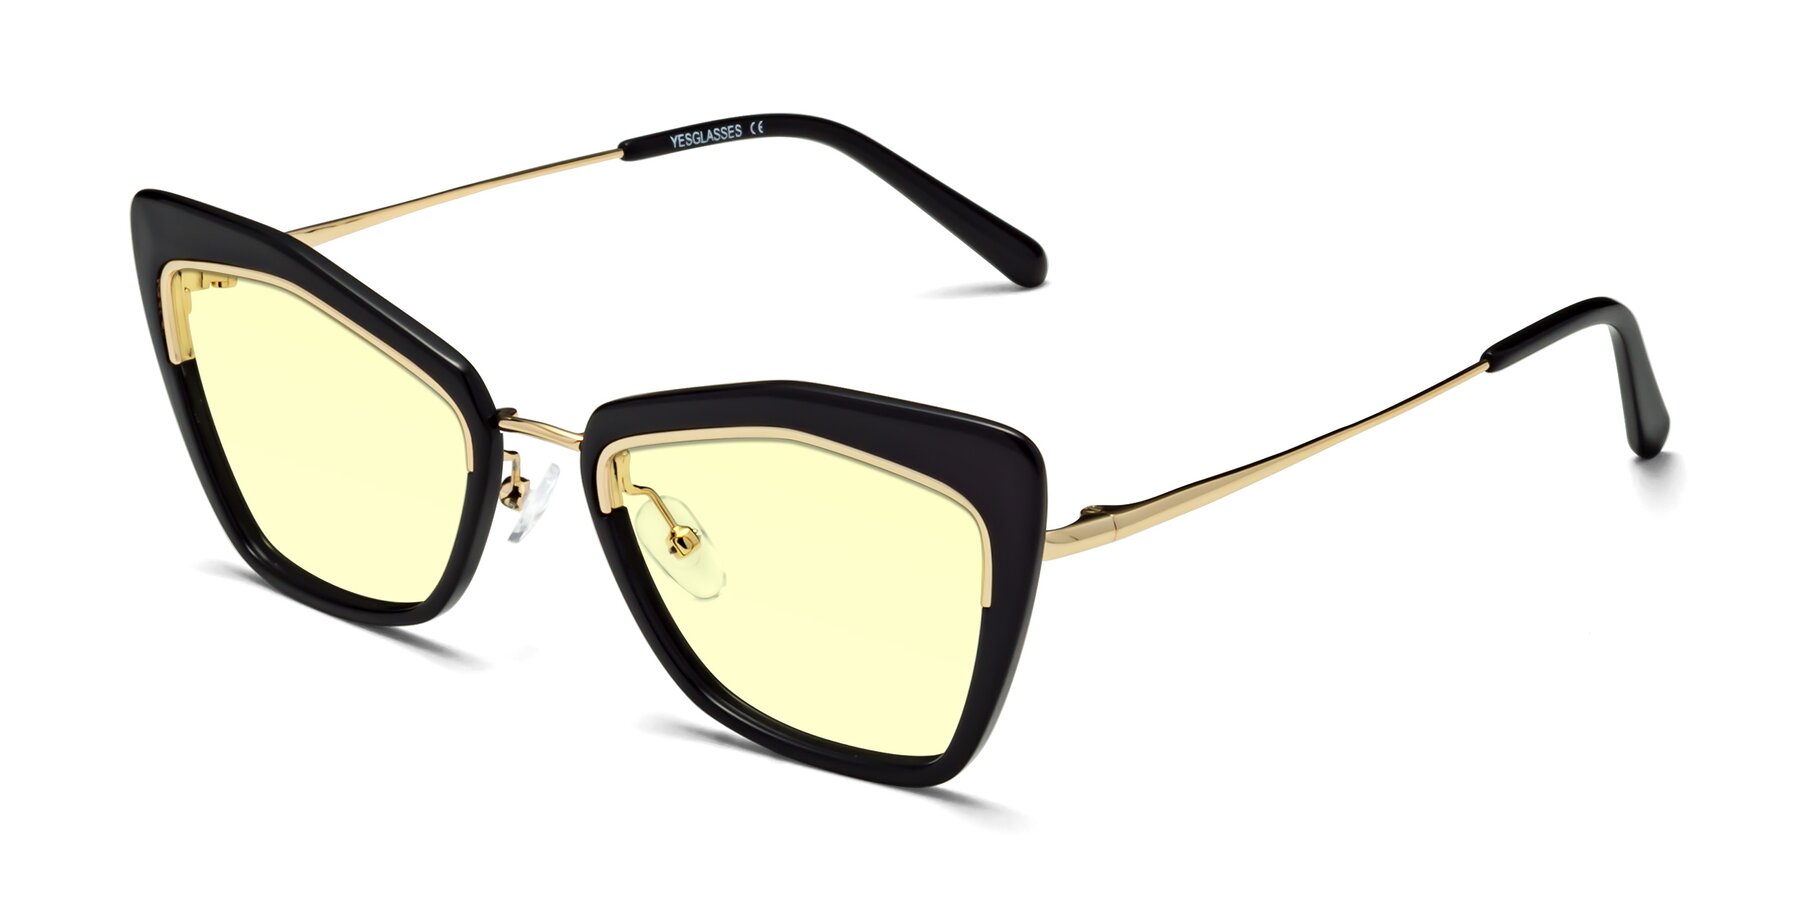 Angle of Lasso in Black with Light Yellow Tinted Lenses